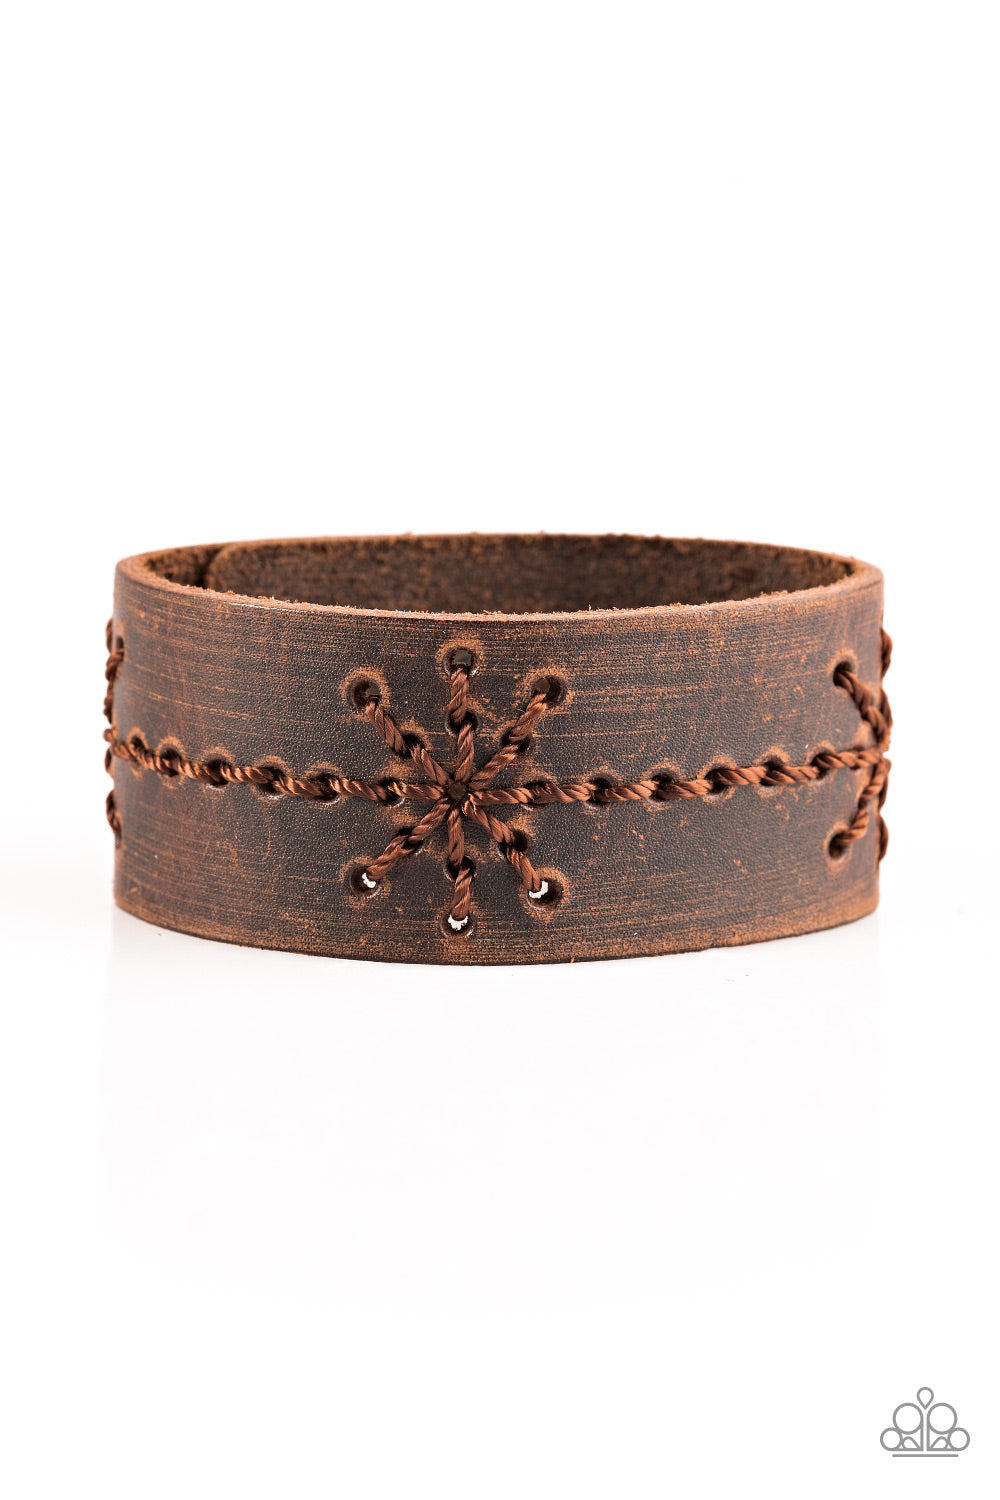 NAUTICAL NATURE - BROWN LEATHER STITCHED SNAP WRAP BRACELET